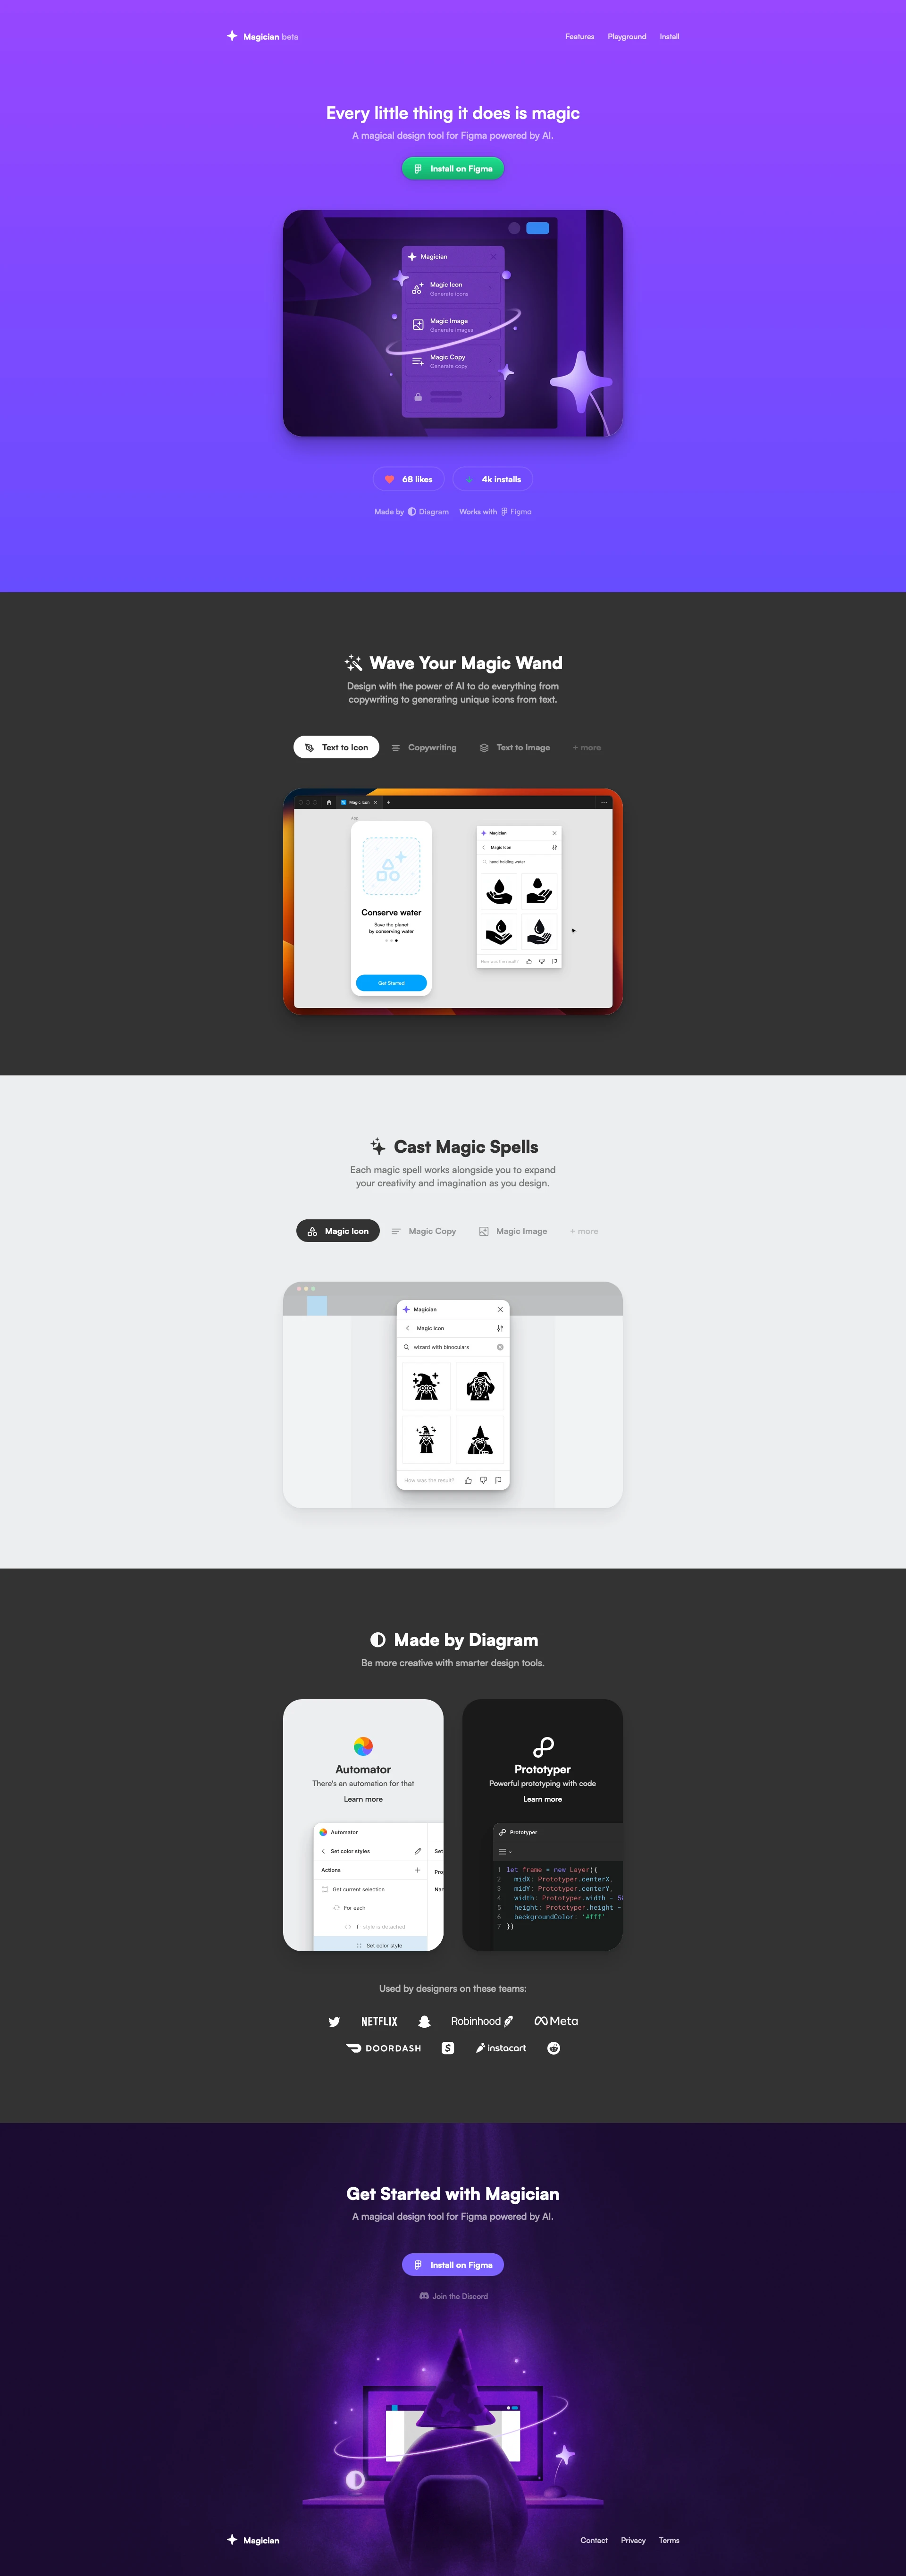 Magician for Figma Landing Page Example: A magical design tool for Figma powered by AI.